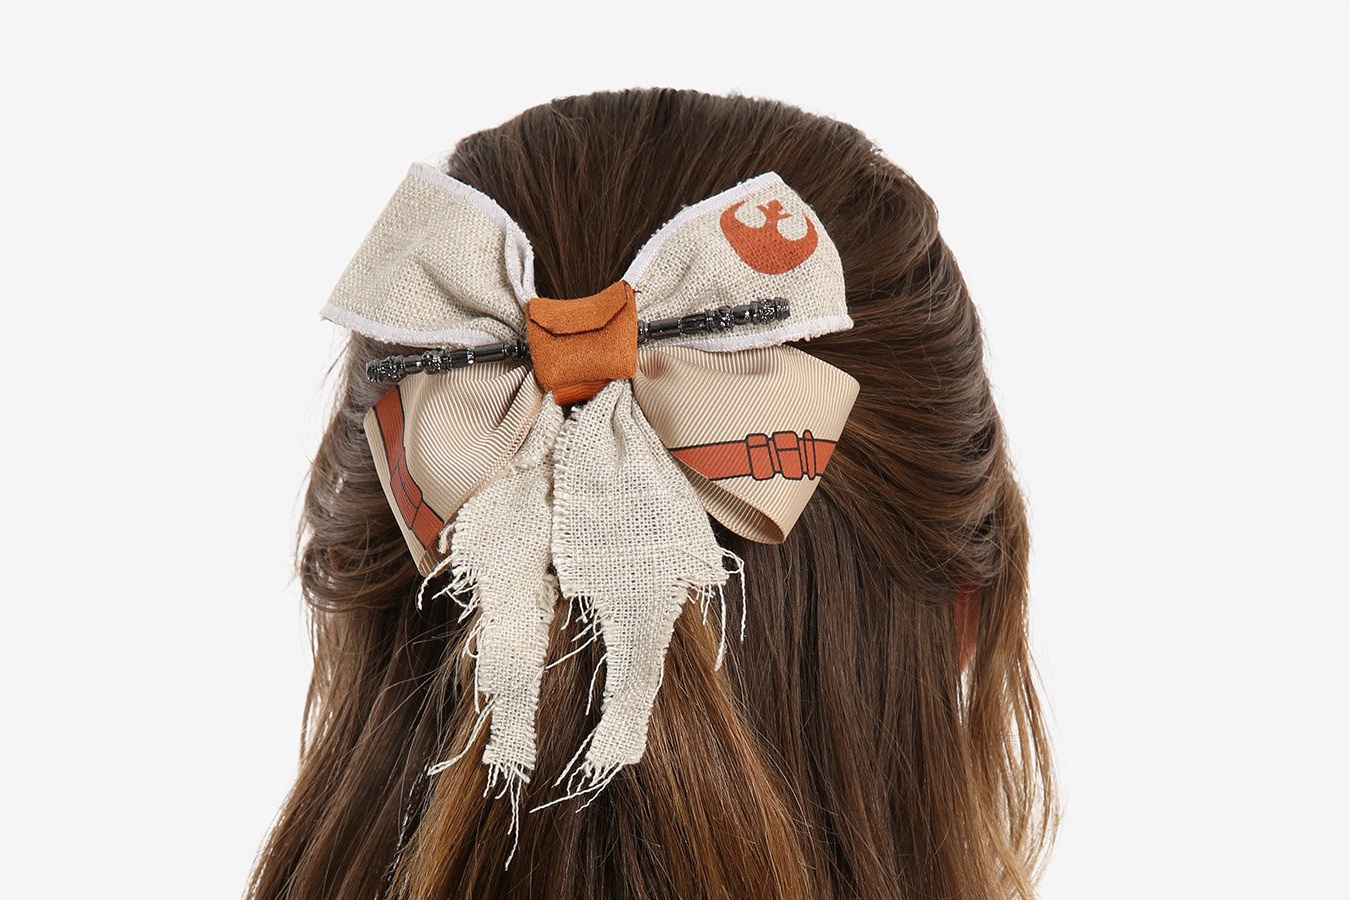 Star Wars The Force Awakens Rey themed hair bow at Box Lunch